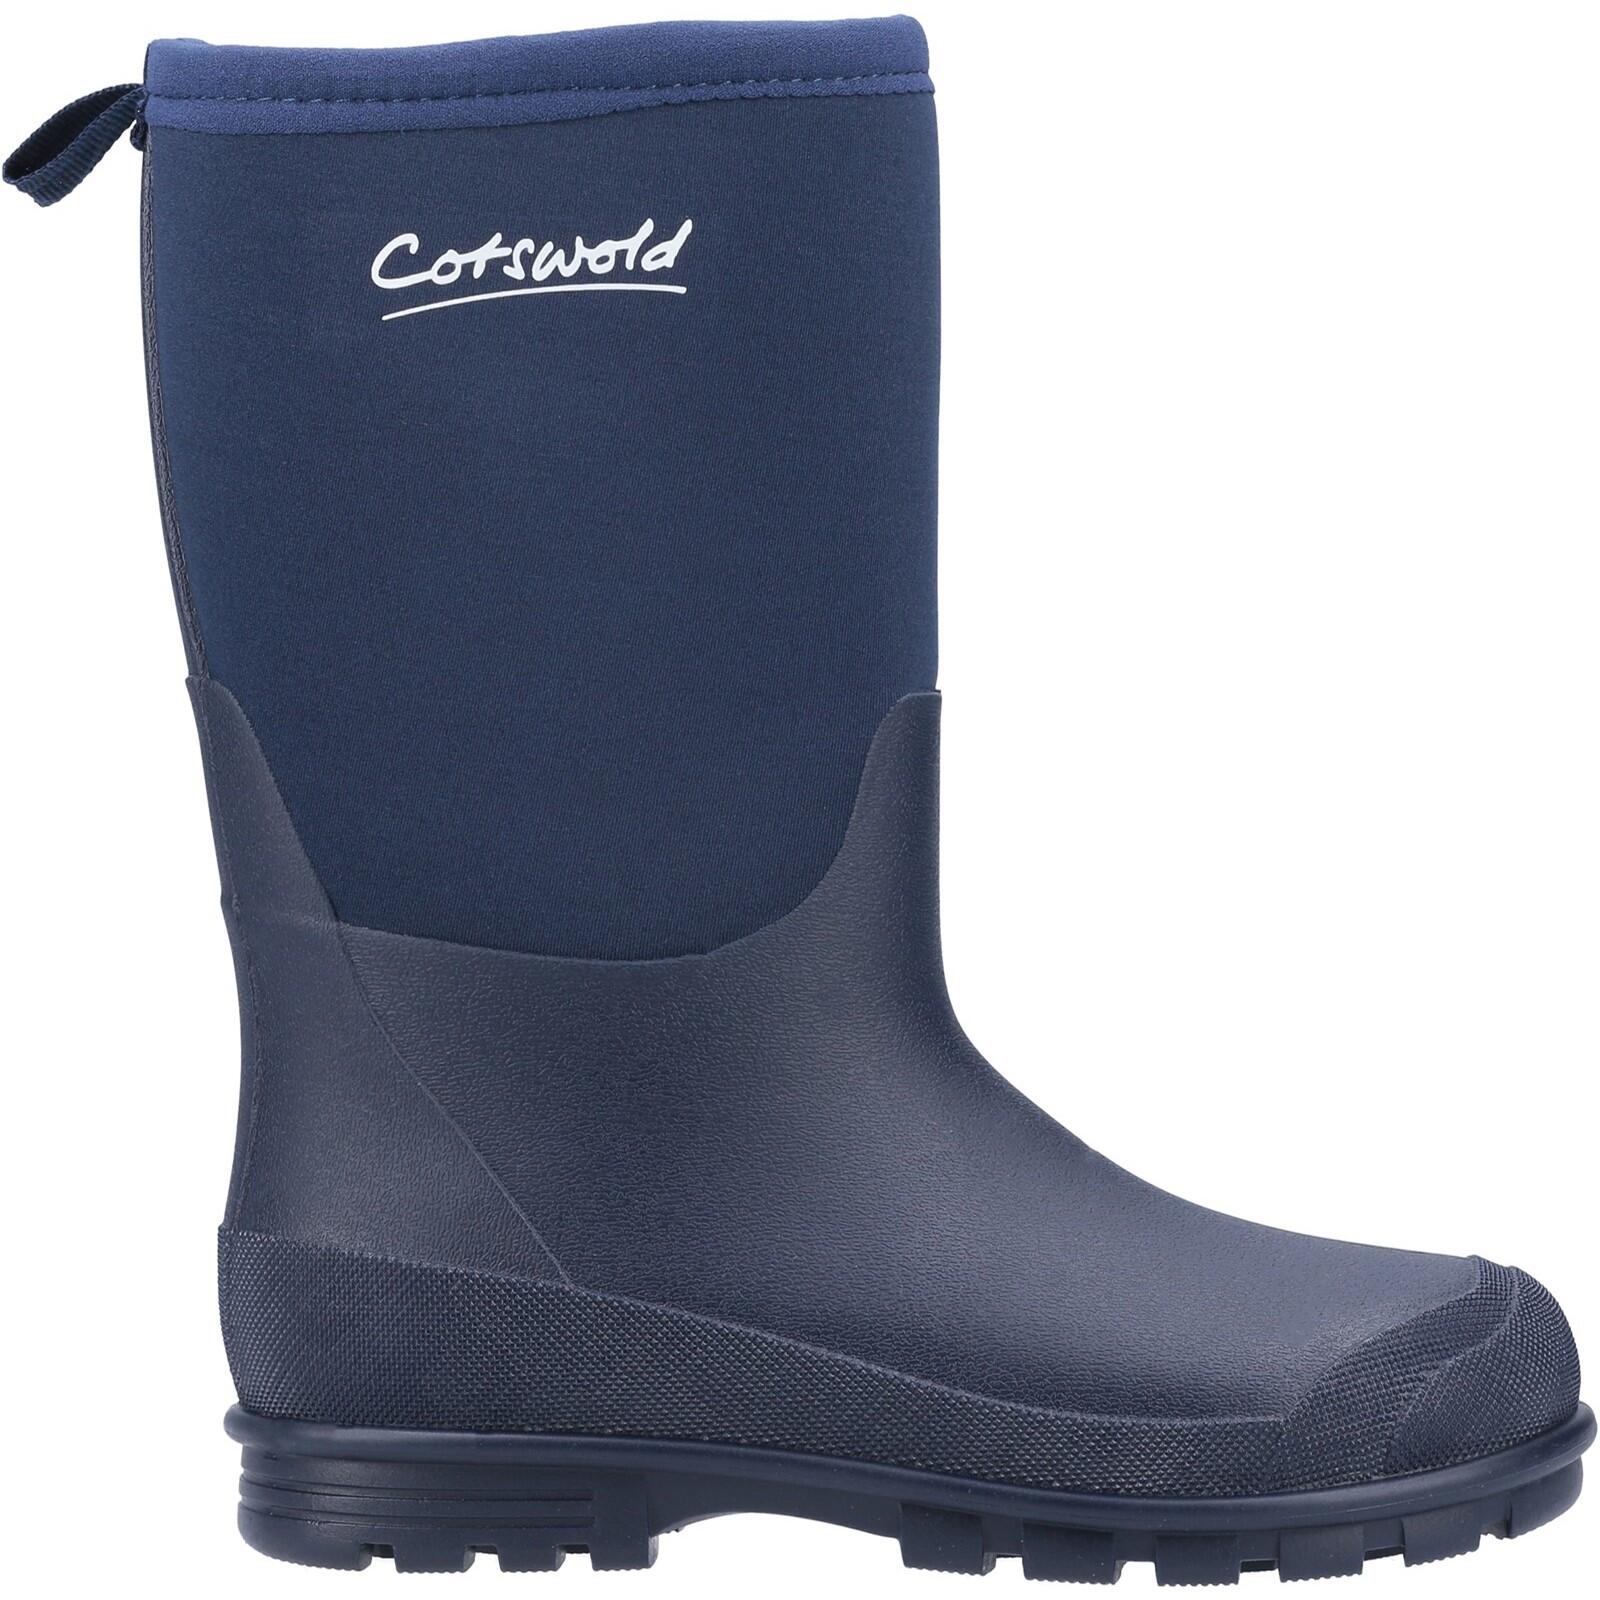 COTSWOLD Hilly Neoprene Childrens Wellingtons Navy blue